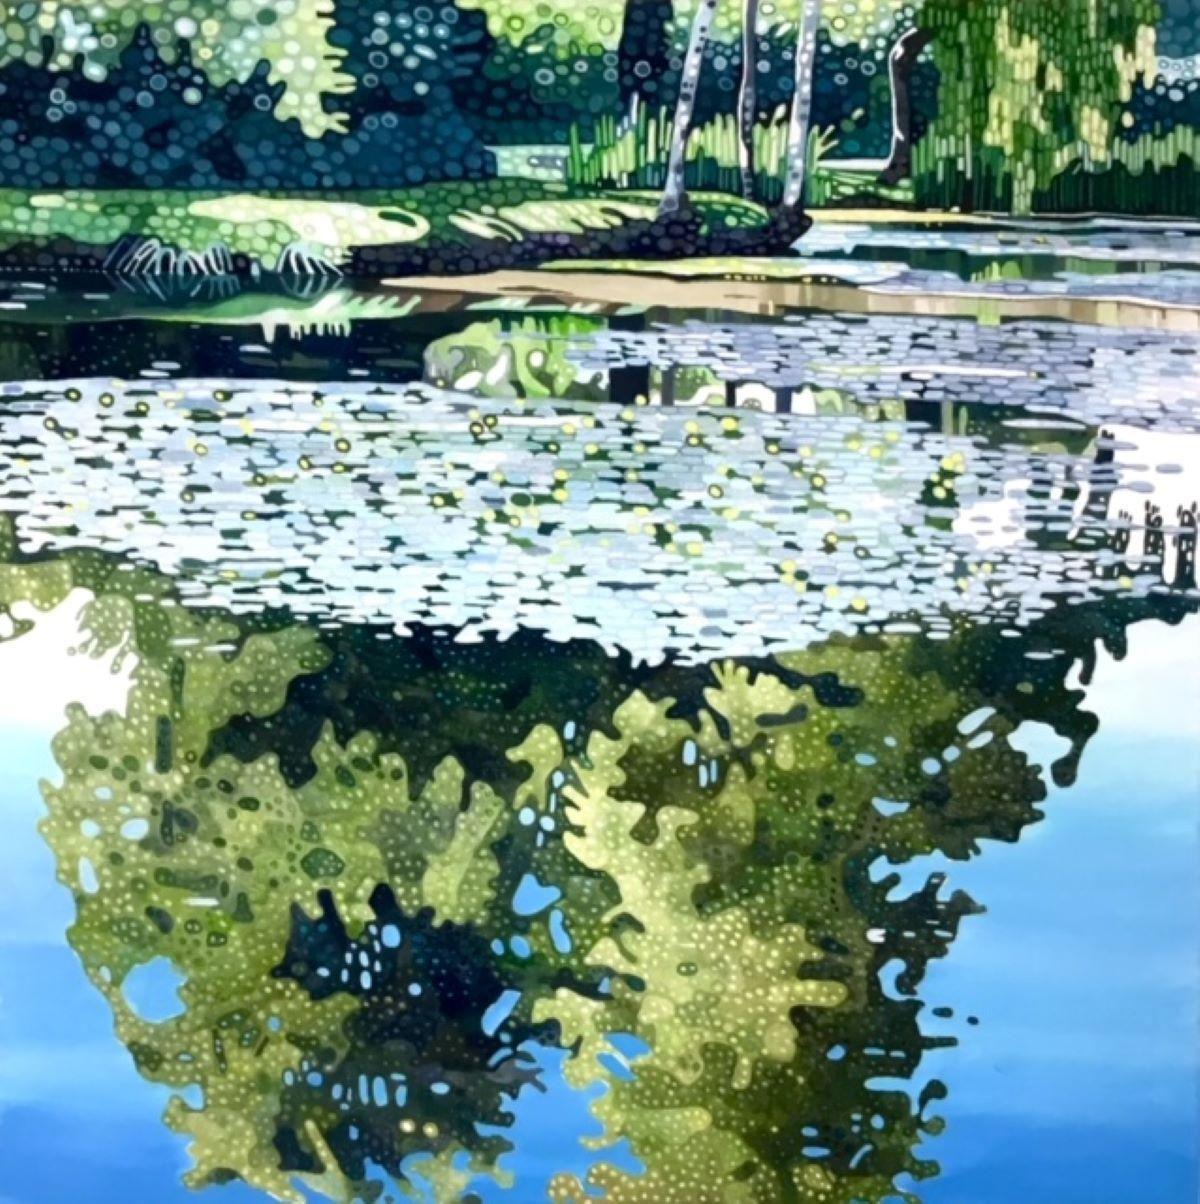 Summer Pond - contemporary landscape circle pointillism reflection park painting - Painting by Ewa Adams